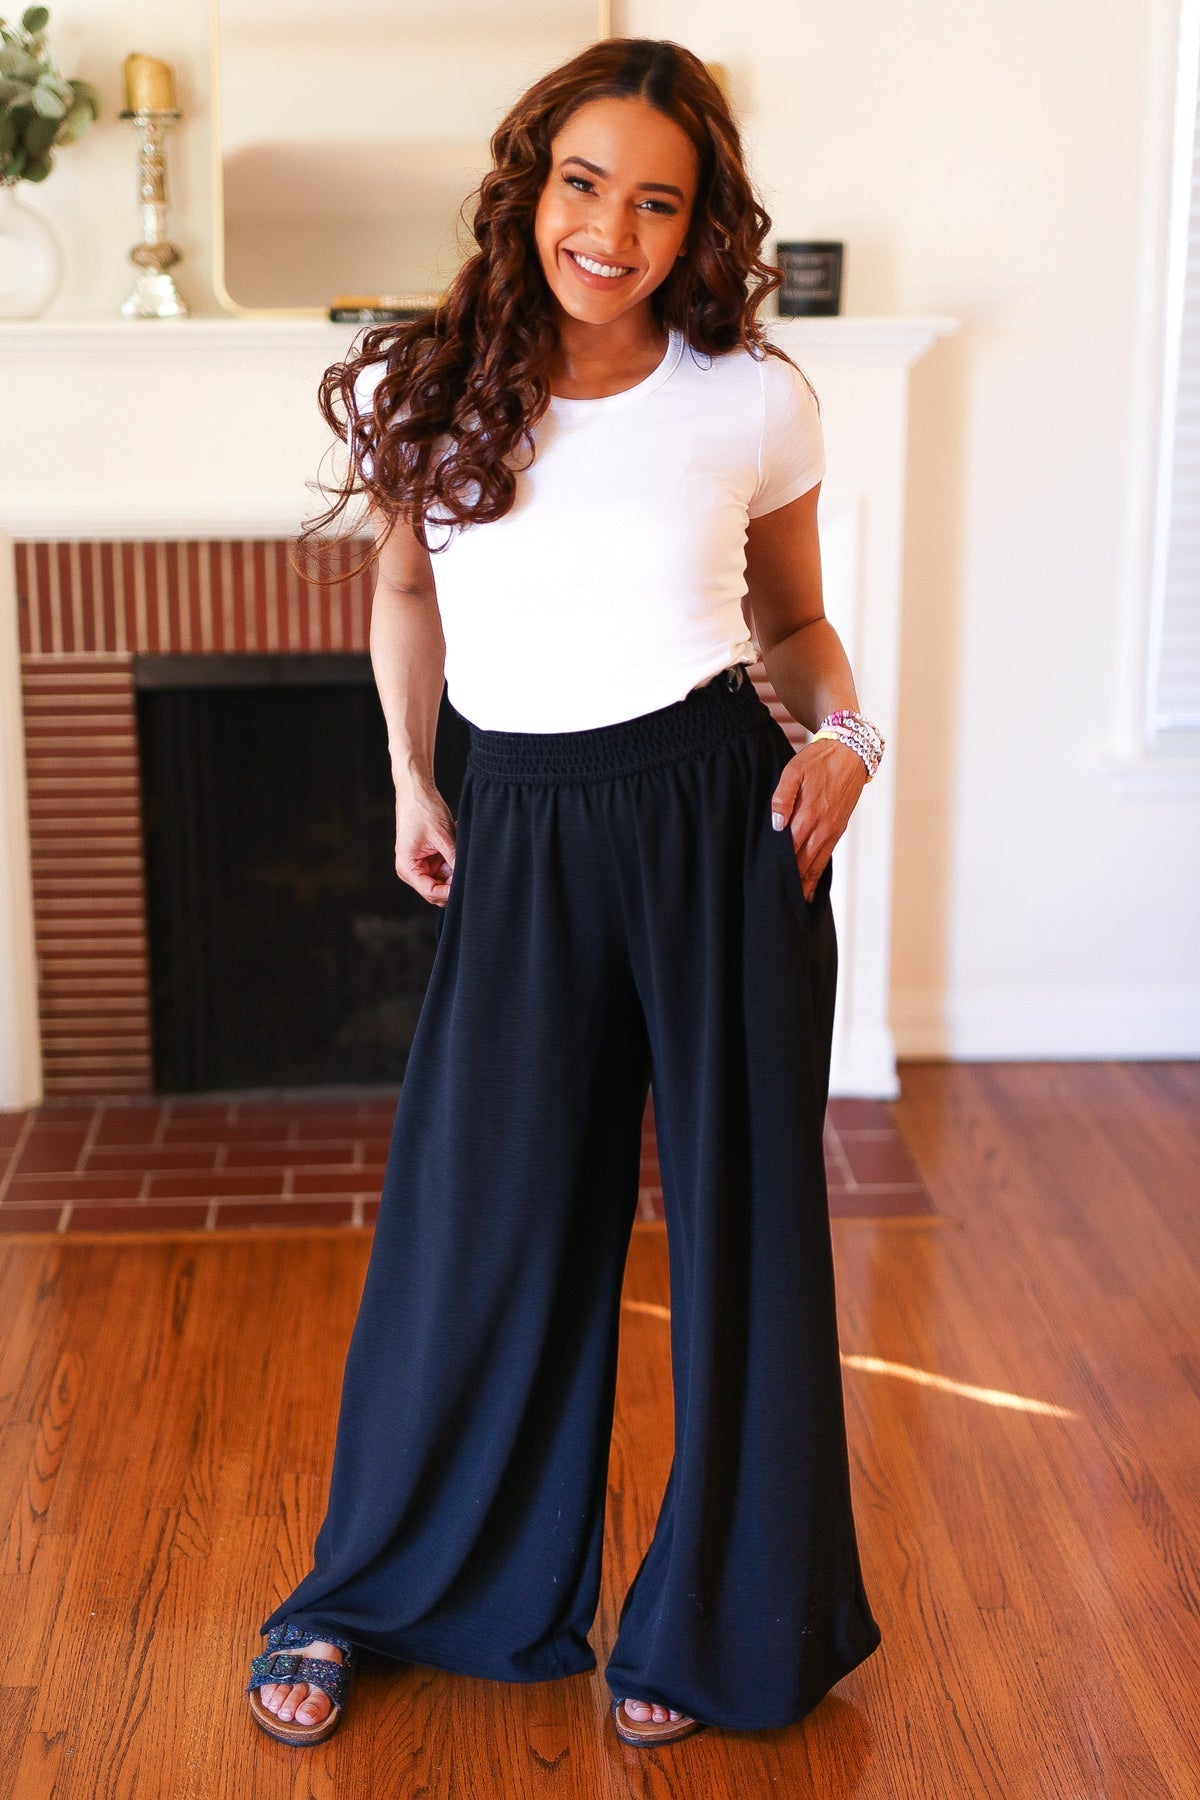 Shop Everyday Black Smocked Waist Palazzo Pants-Pants at Ruby Joy Boutique, a Women's Clothing Store in Pickerington, Ohio